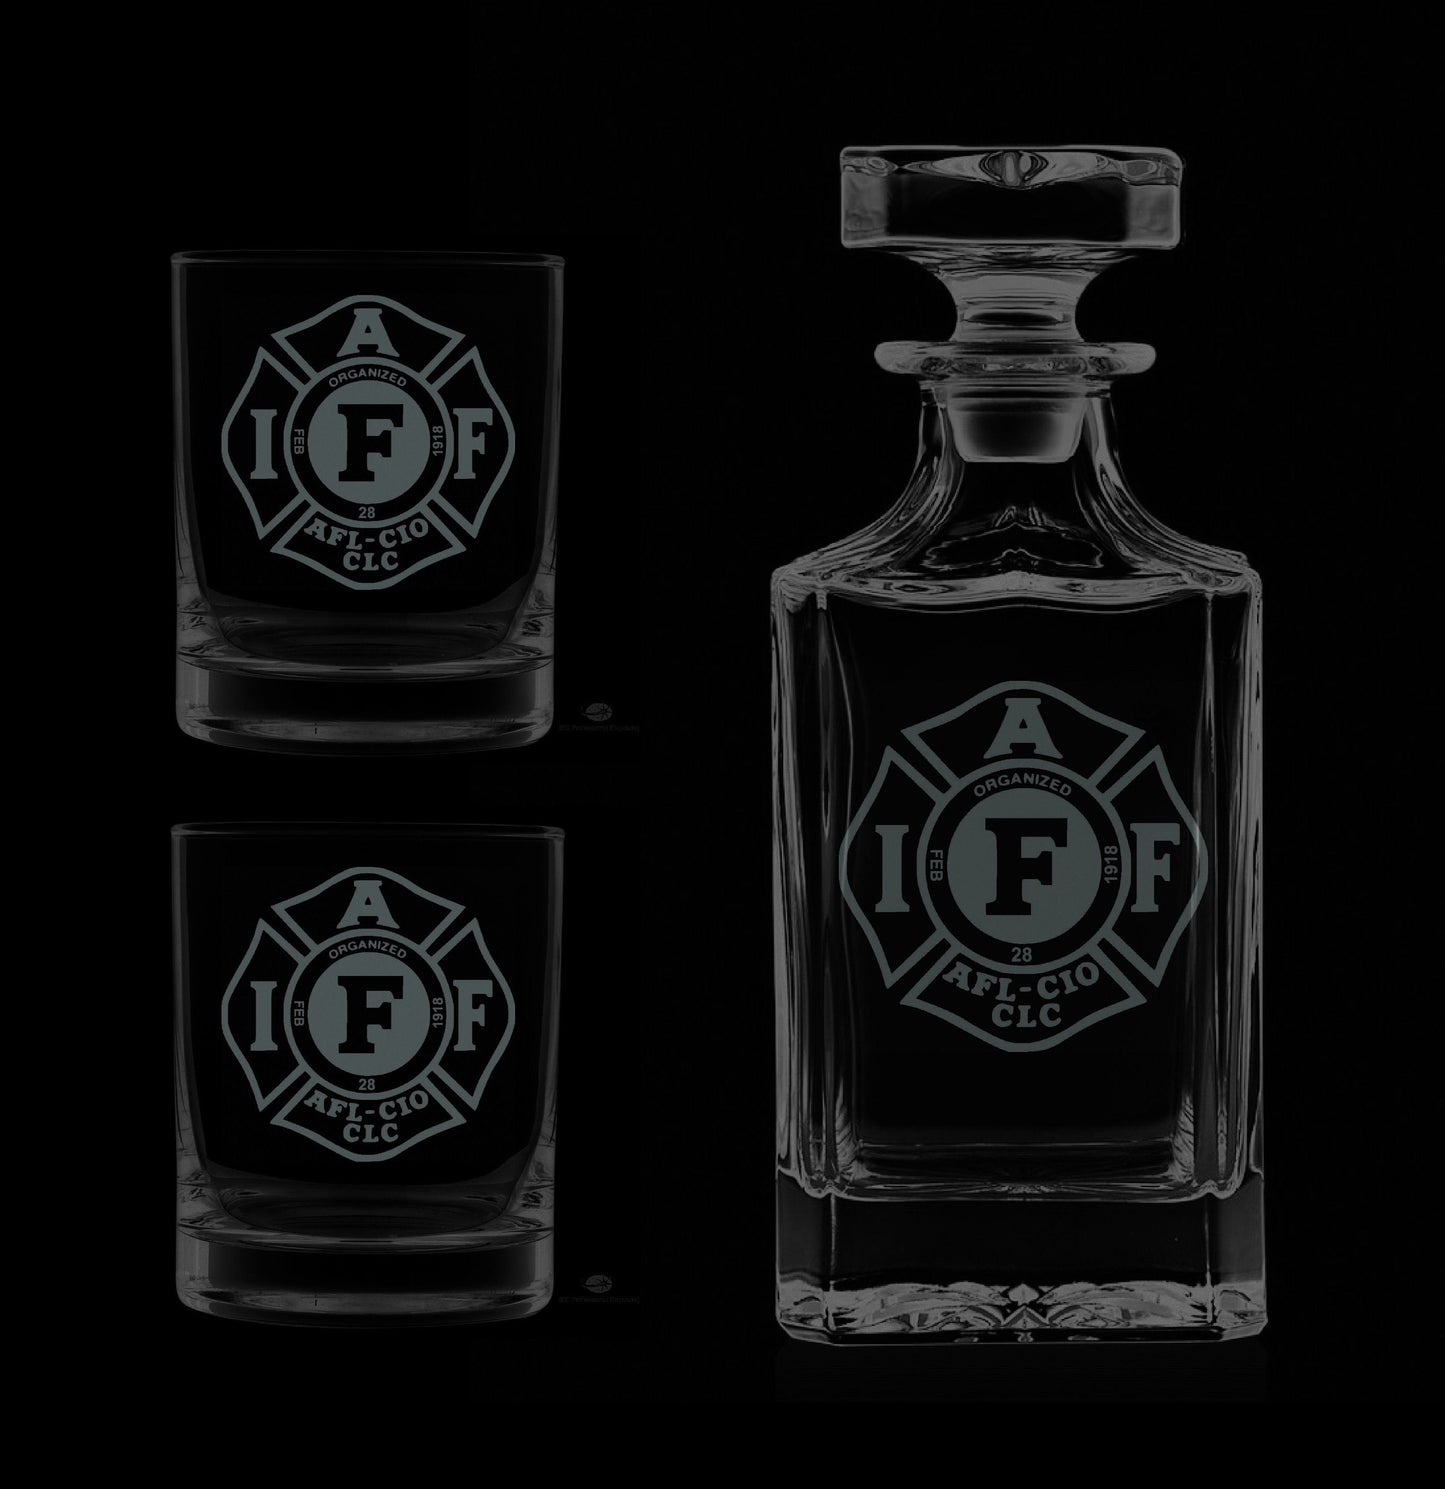 IAFF Officially Licensed 25 Ounce Whiskey Decanter With Optional Rocks Glasses